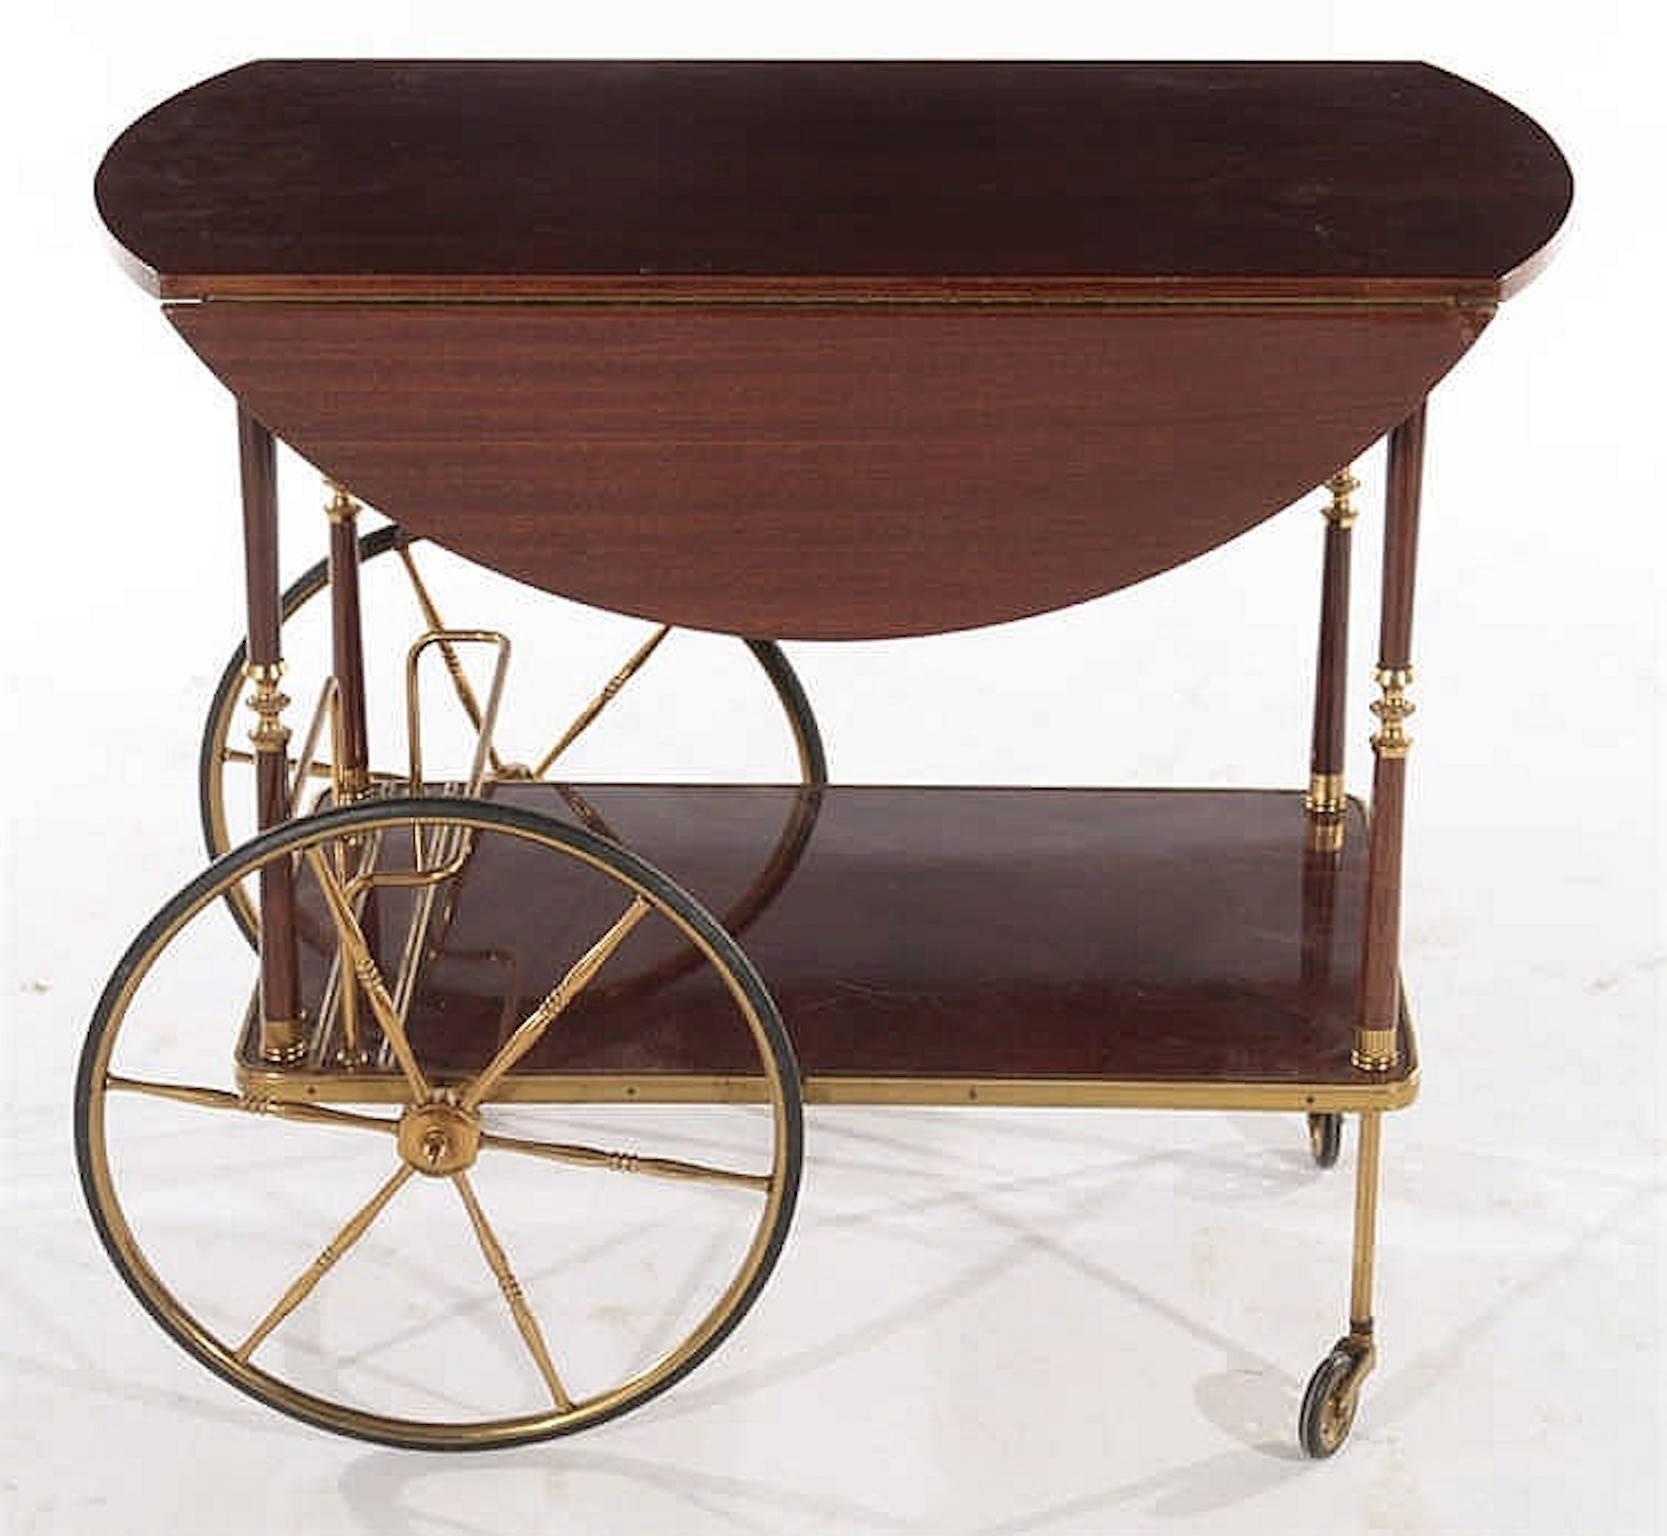 Mahogany and brass French service trolley with drop leaves, circa 1950.